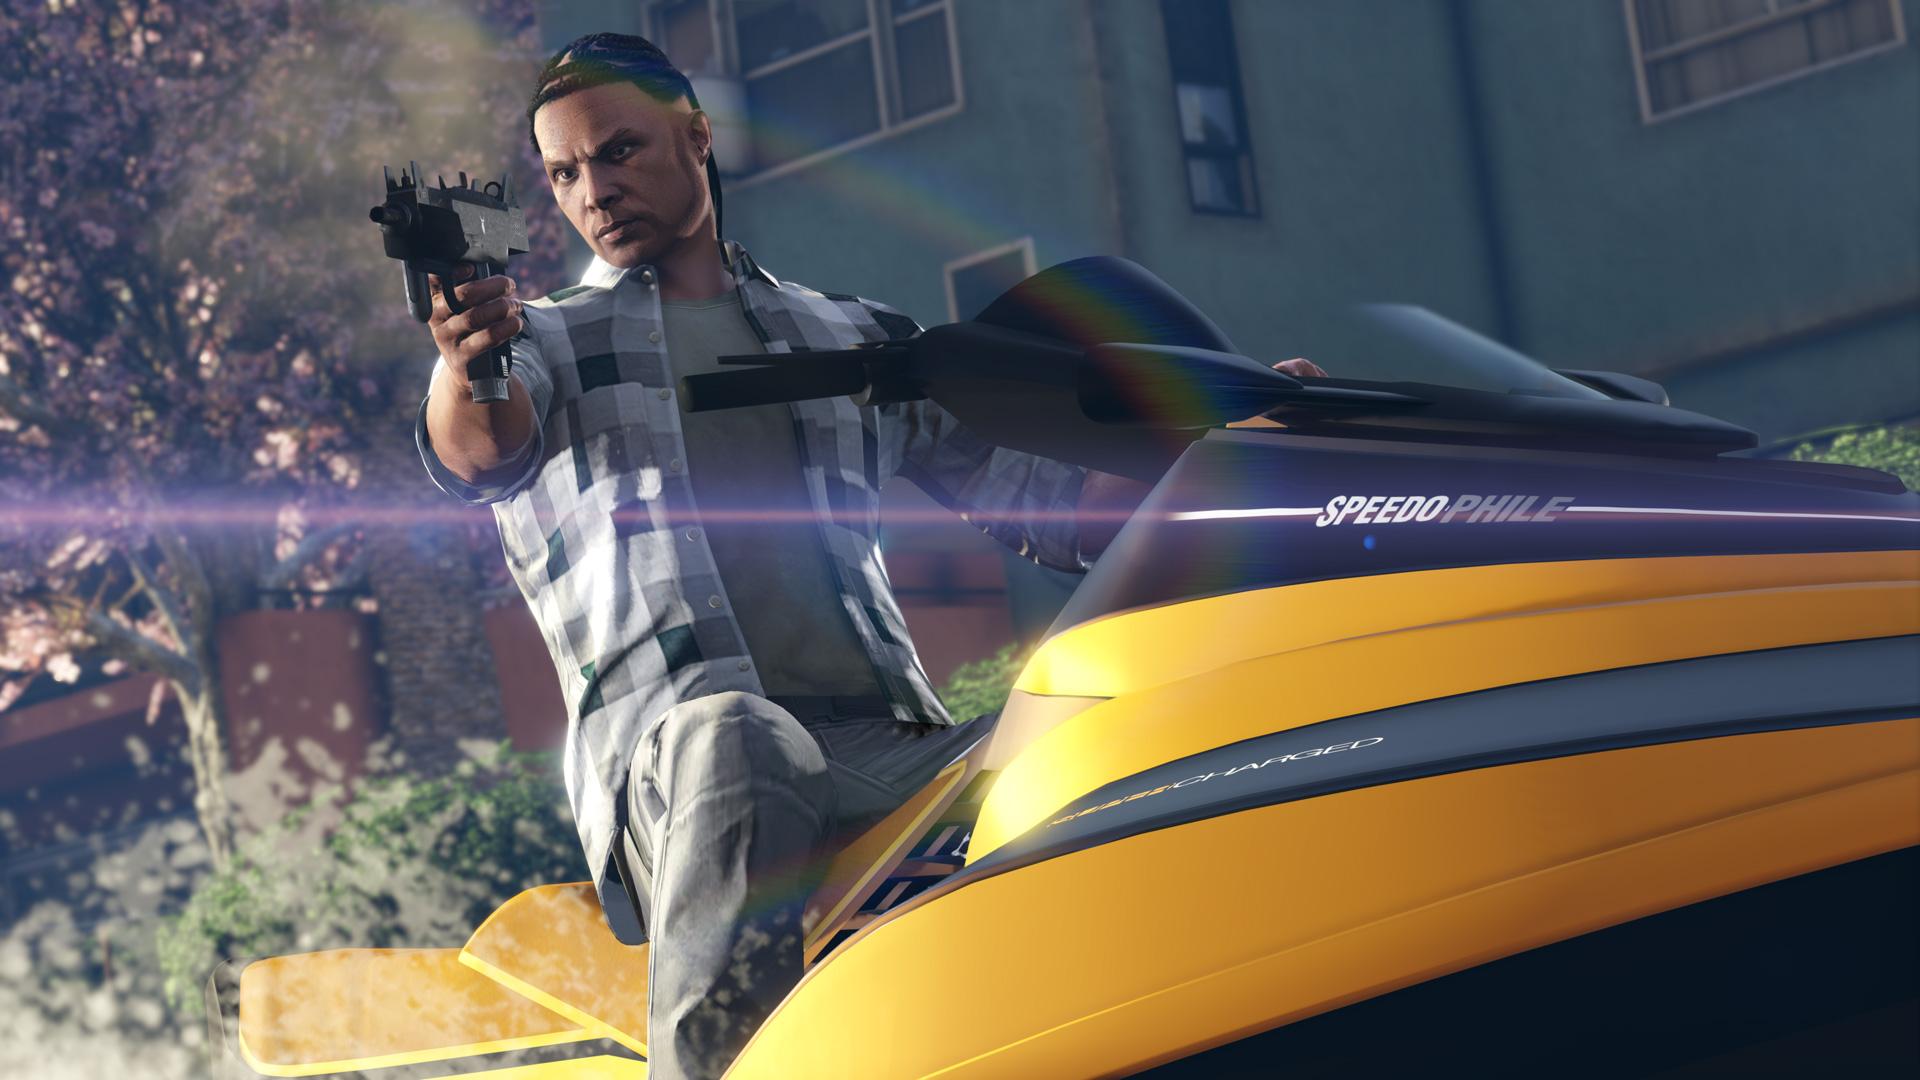 GTA 6 PlayStation 5 timed exclusive rumours are stressing fans out